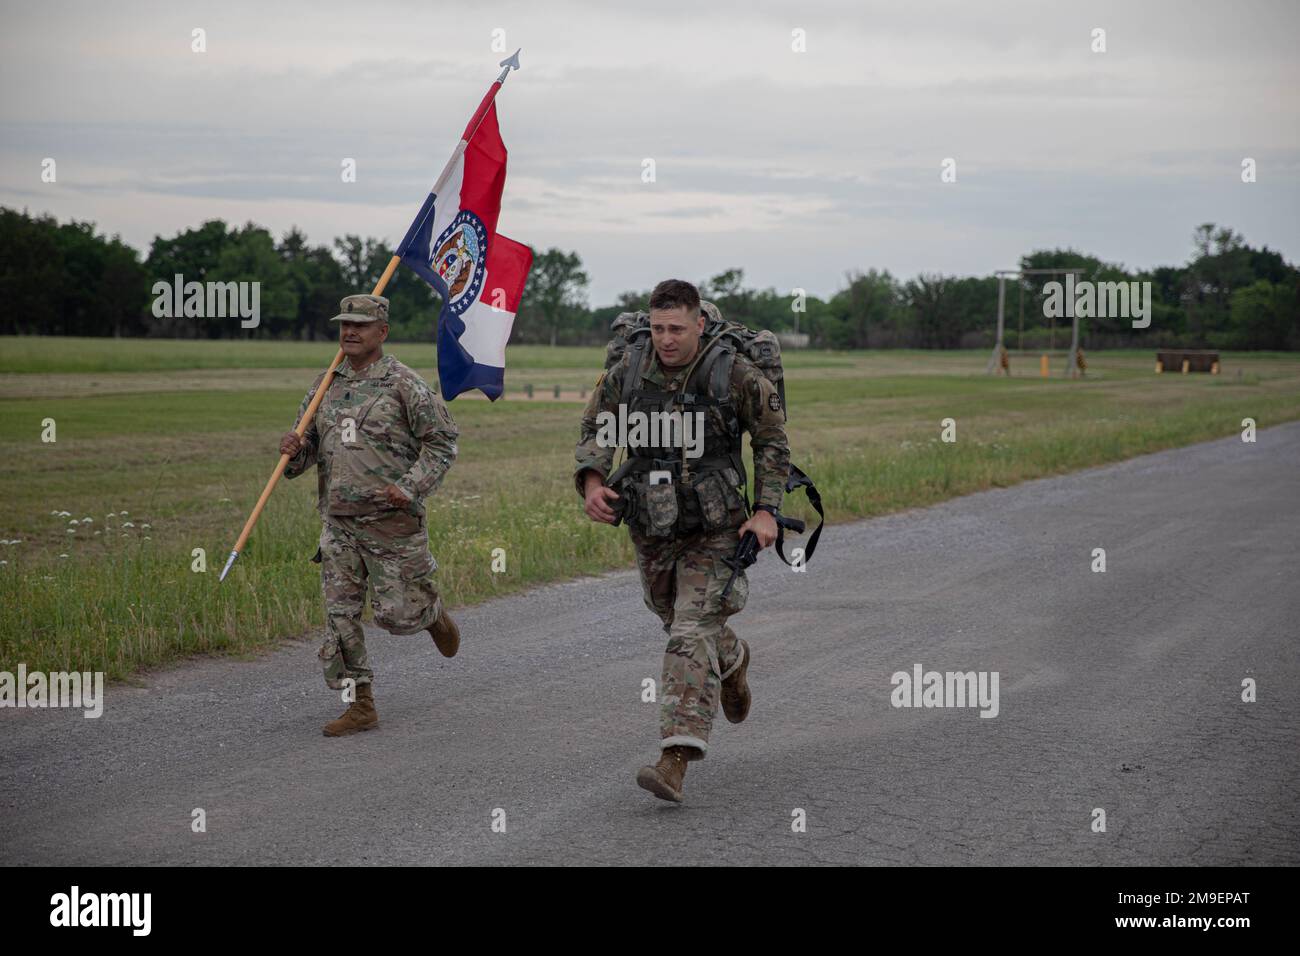 Staff Sgt. Michael Lincks, Missouri National Guard, runs the final stretch of a 12 mile ruck march, a challenge at the National Guard Region V Best Warrior Competition, Camp Gruber Training Center, Okla., May 19, 2022. The Annual Competition brings together top-tier soldiers to challenge them on a variety of Army warrior tasks. (Oklahoma National Guard photo by Sgt. Reece Heck) Stock Photo